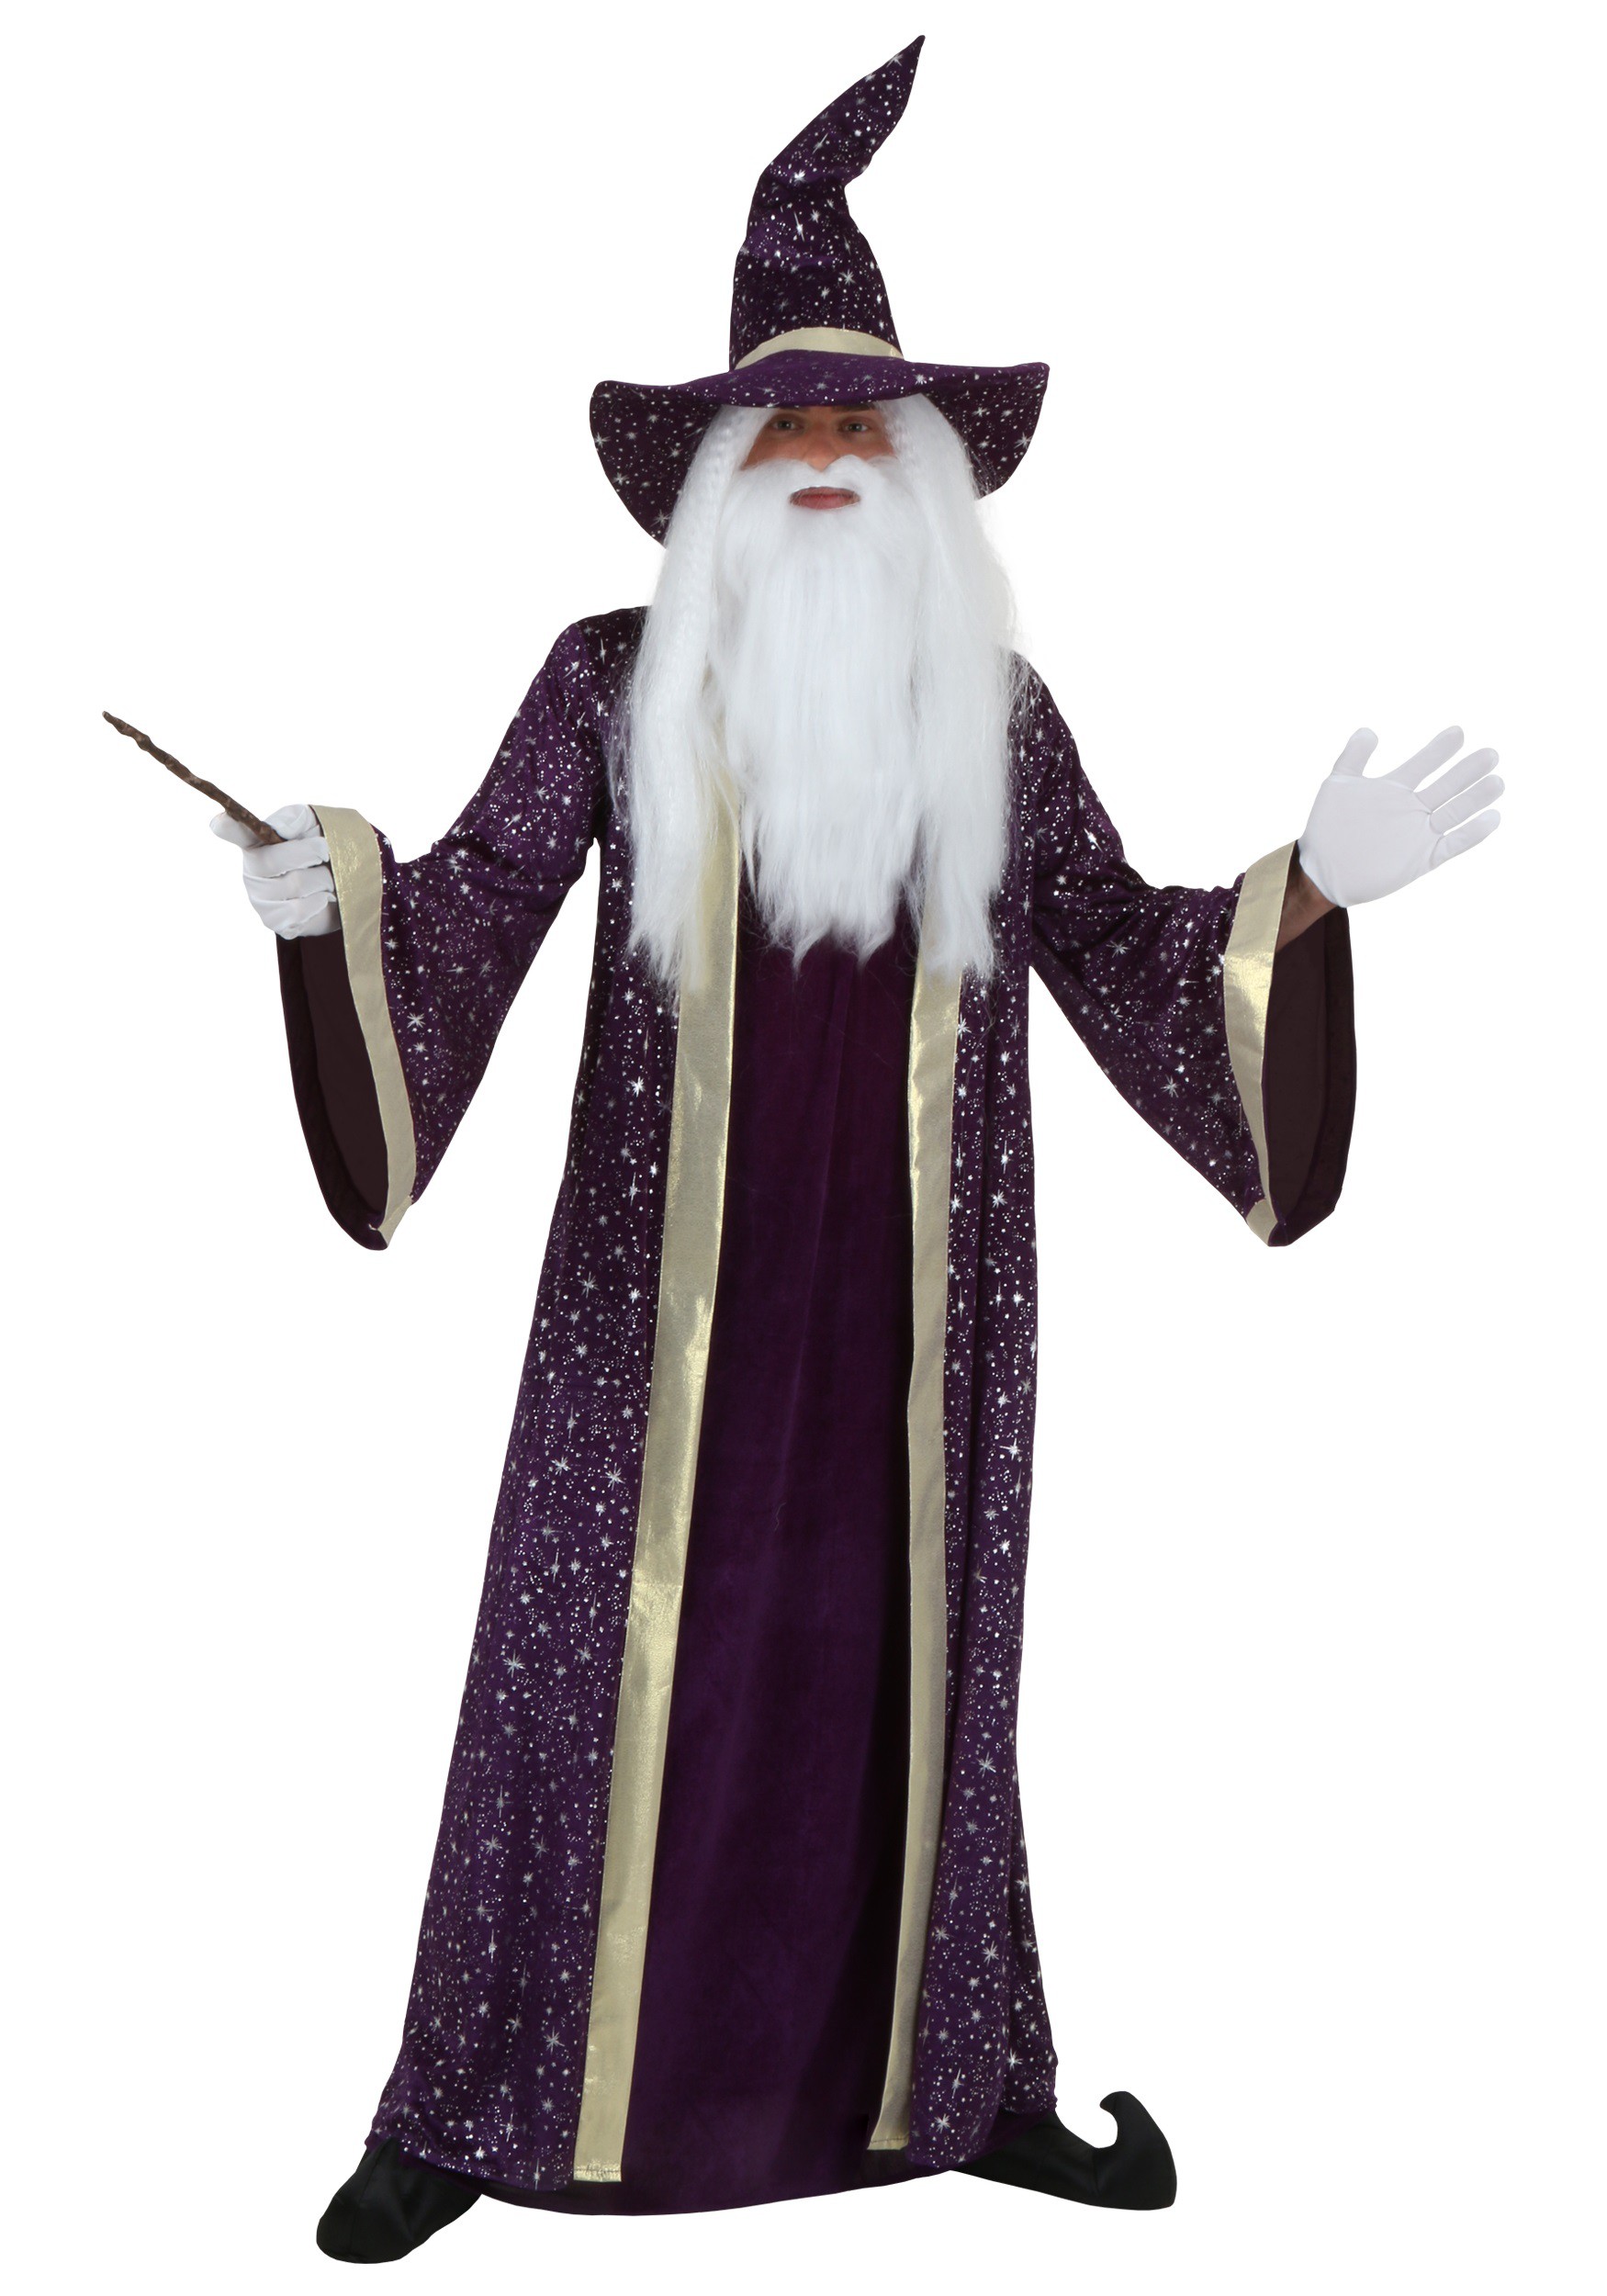 NEW Black Adult or Child Wizard Hat or Merlin Ha One Size costume crazy hat fun 